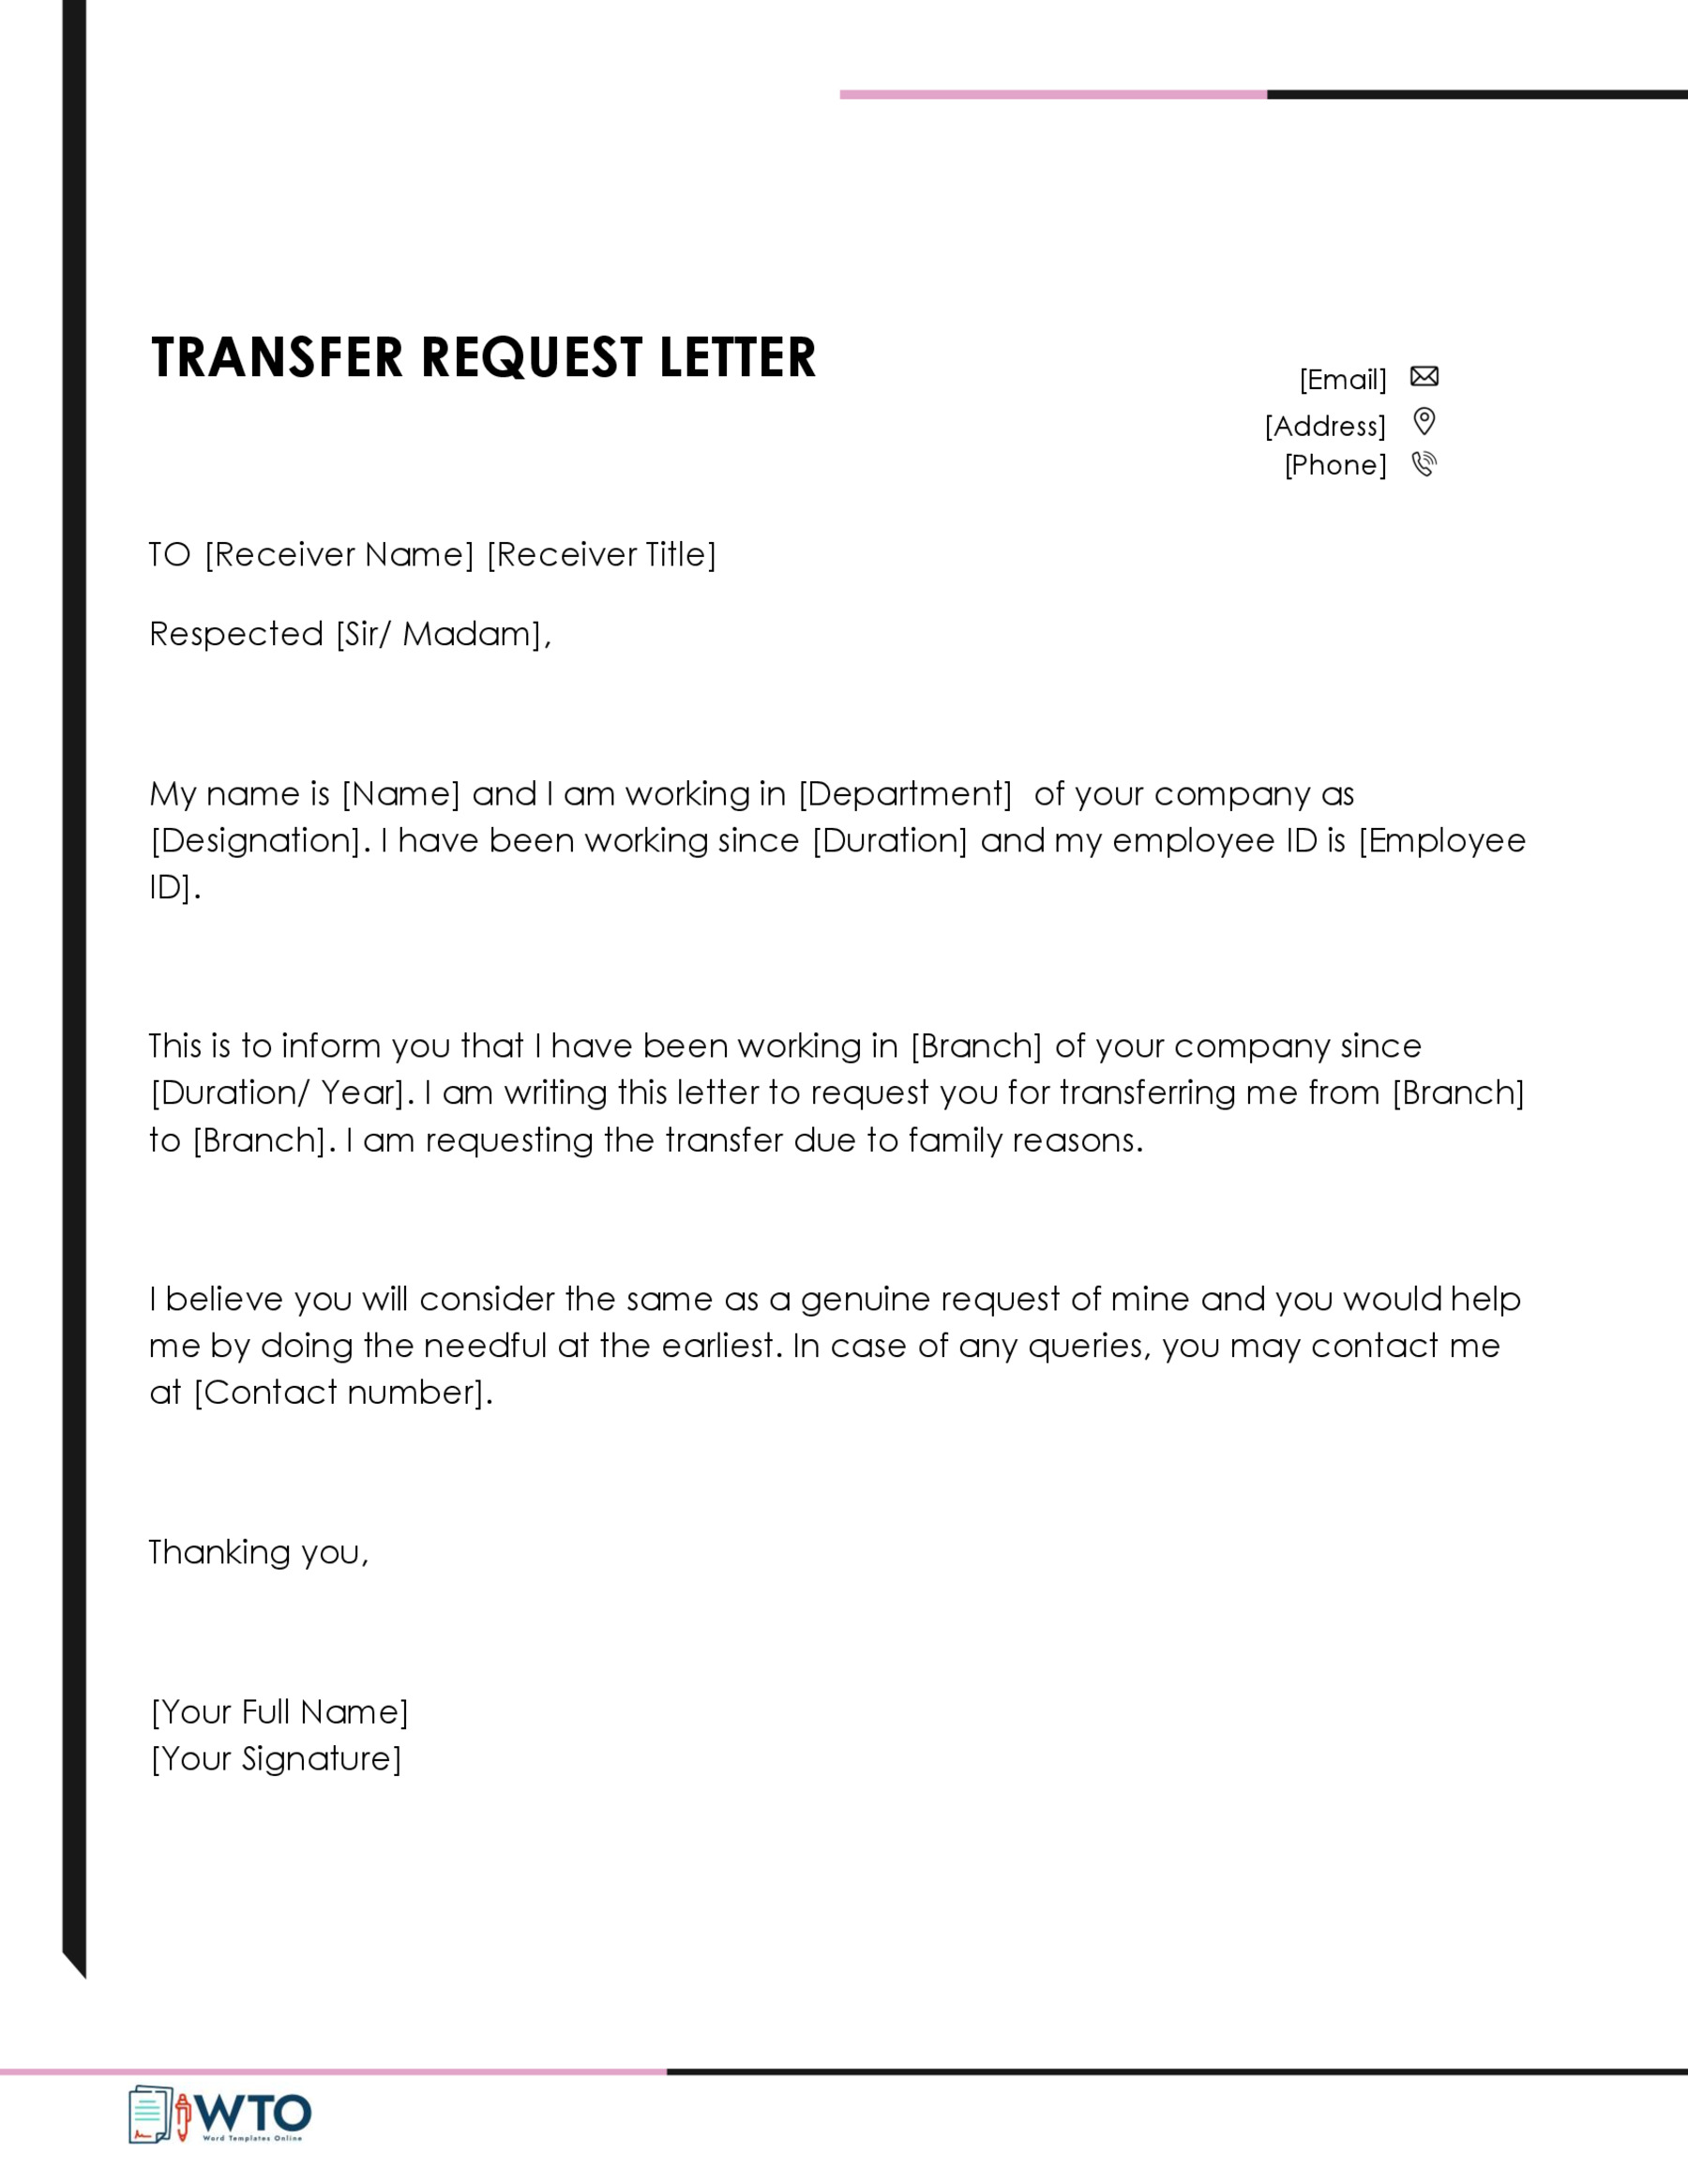 Free Downloadable Transfer Request Letter Sample 02 as Word File